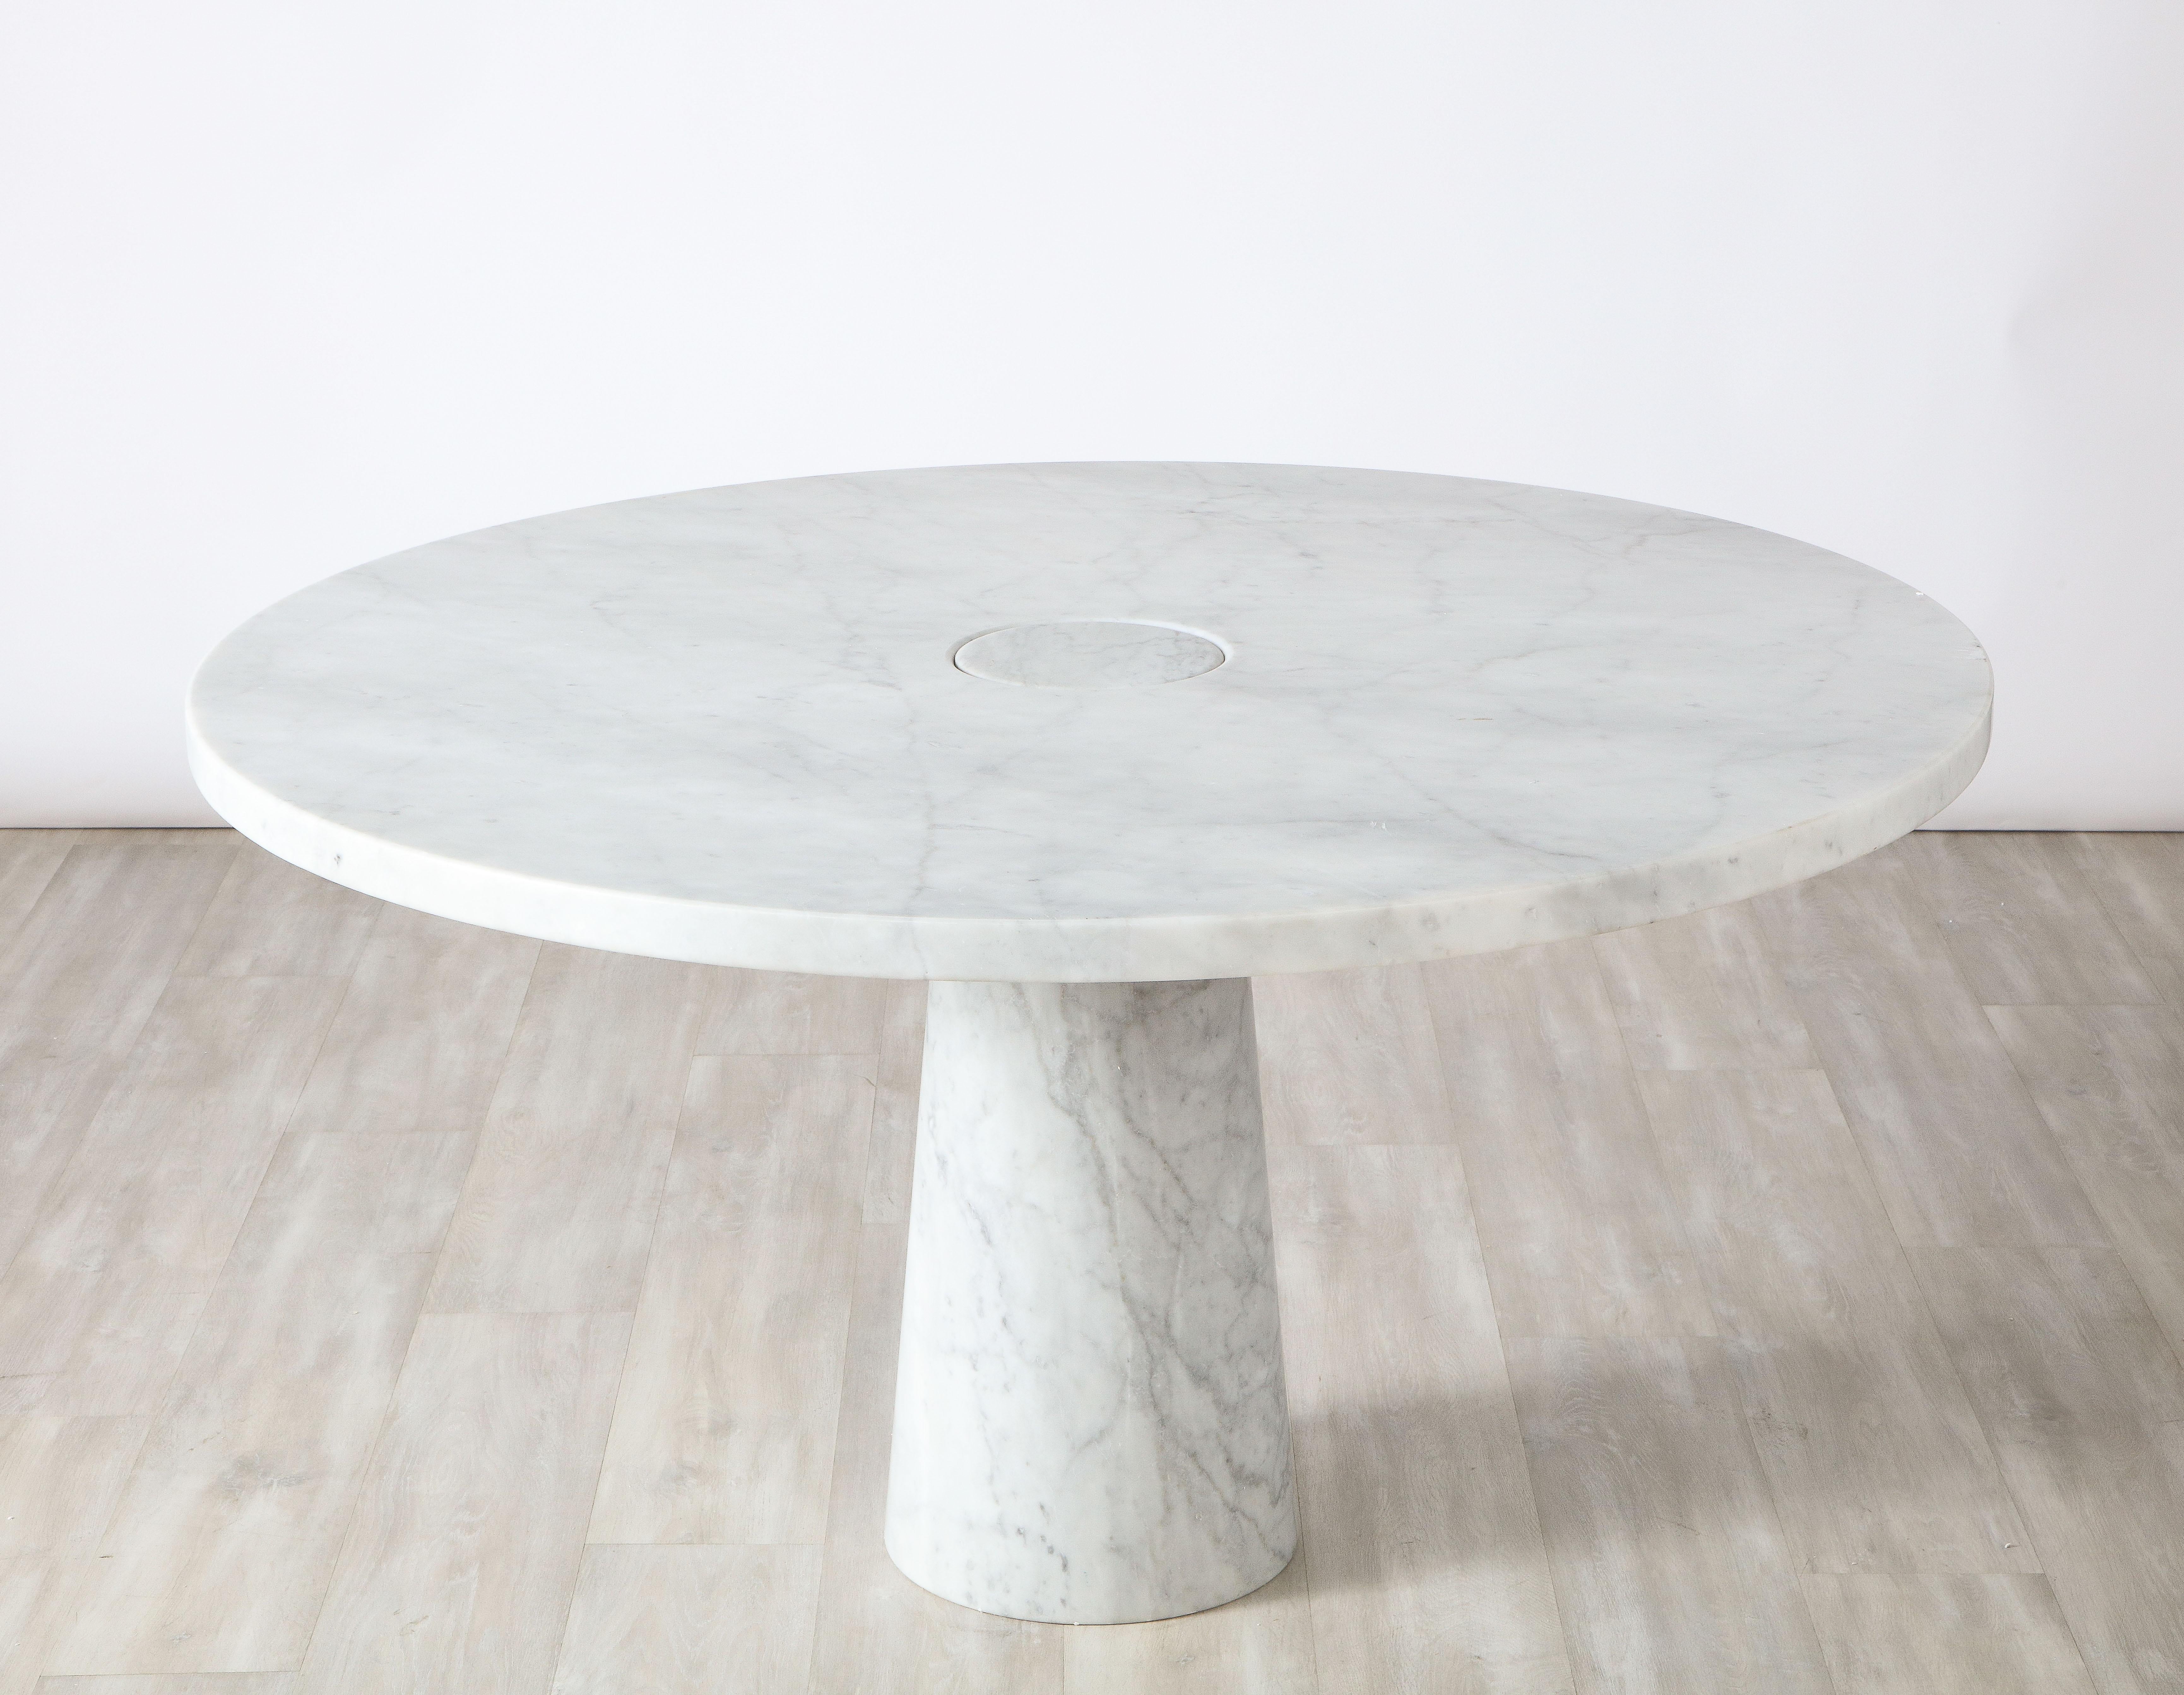 A Carrara marble pedestal dining table, Attributed to Angelo Mangiarotti for Skipper, Italy, 1970's. This circular table features no joints or clamps and is architecturally grand in its structure, featuring a singular conical pedestal that is